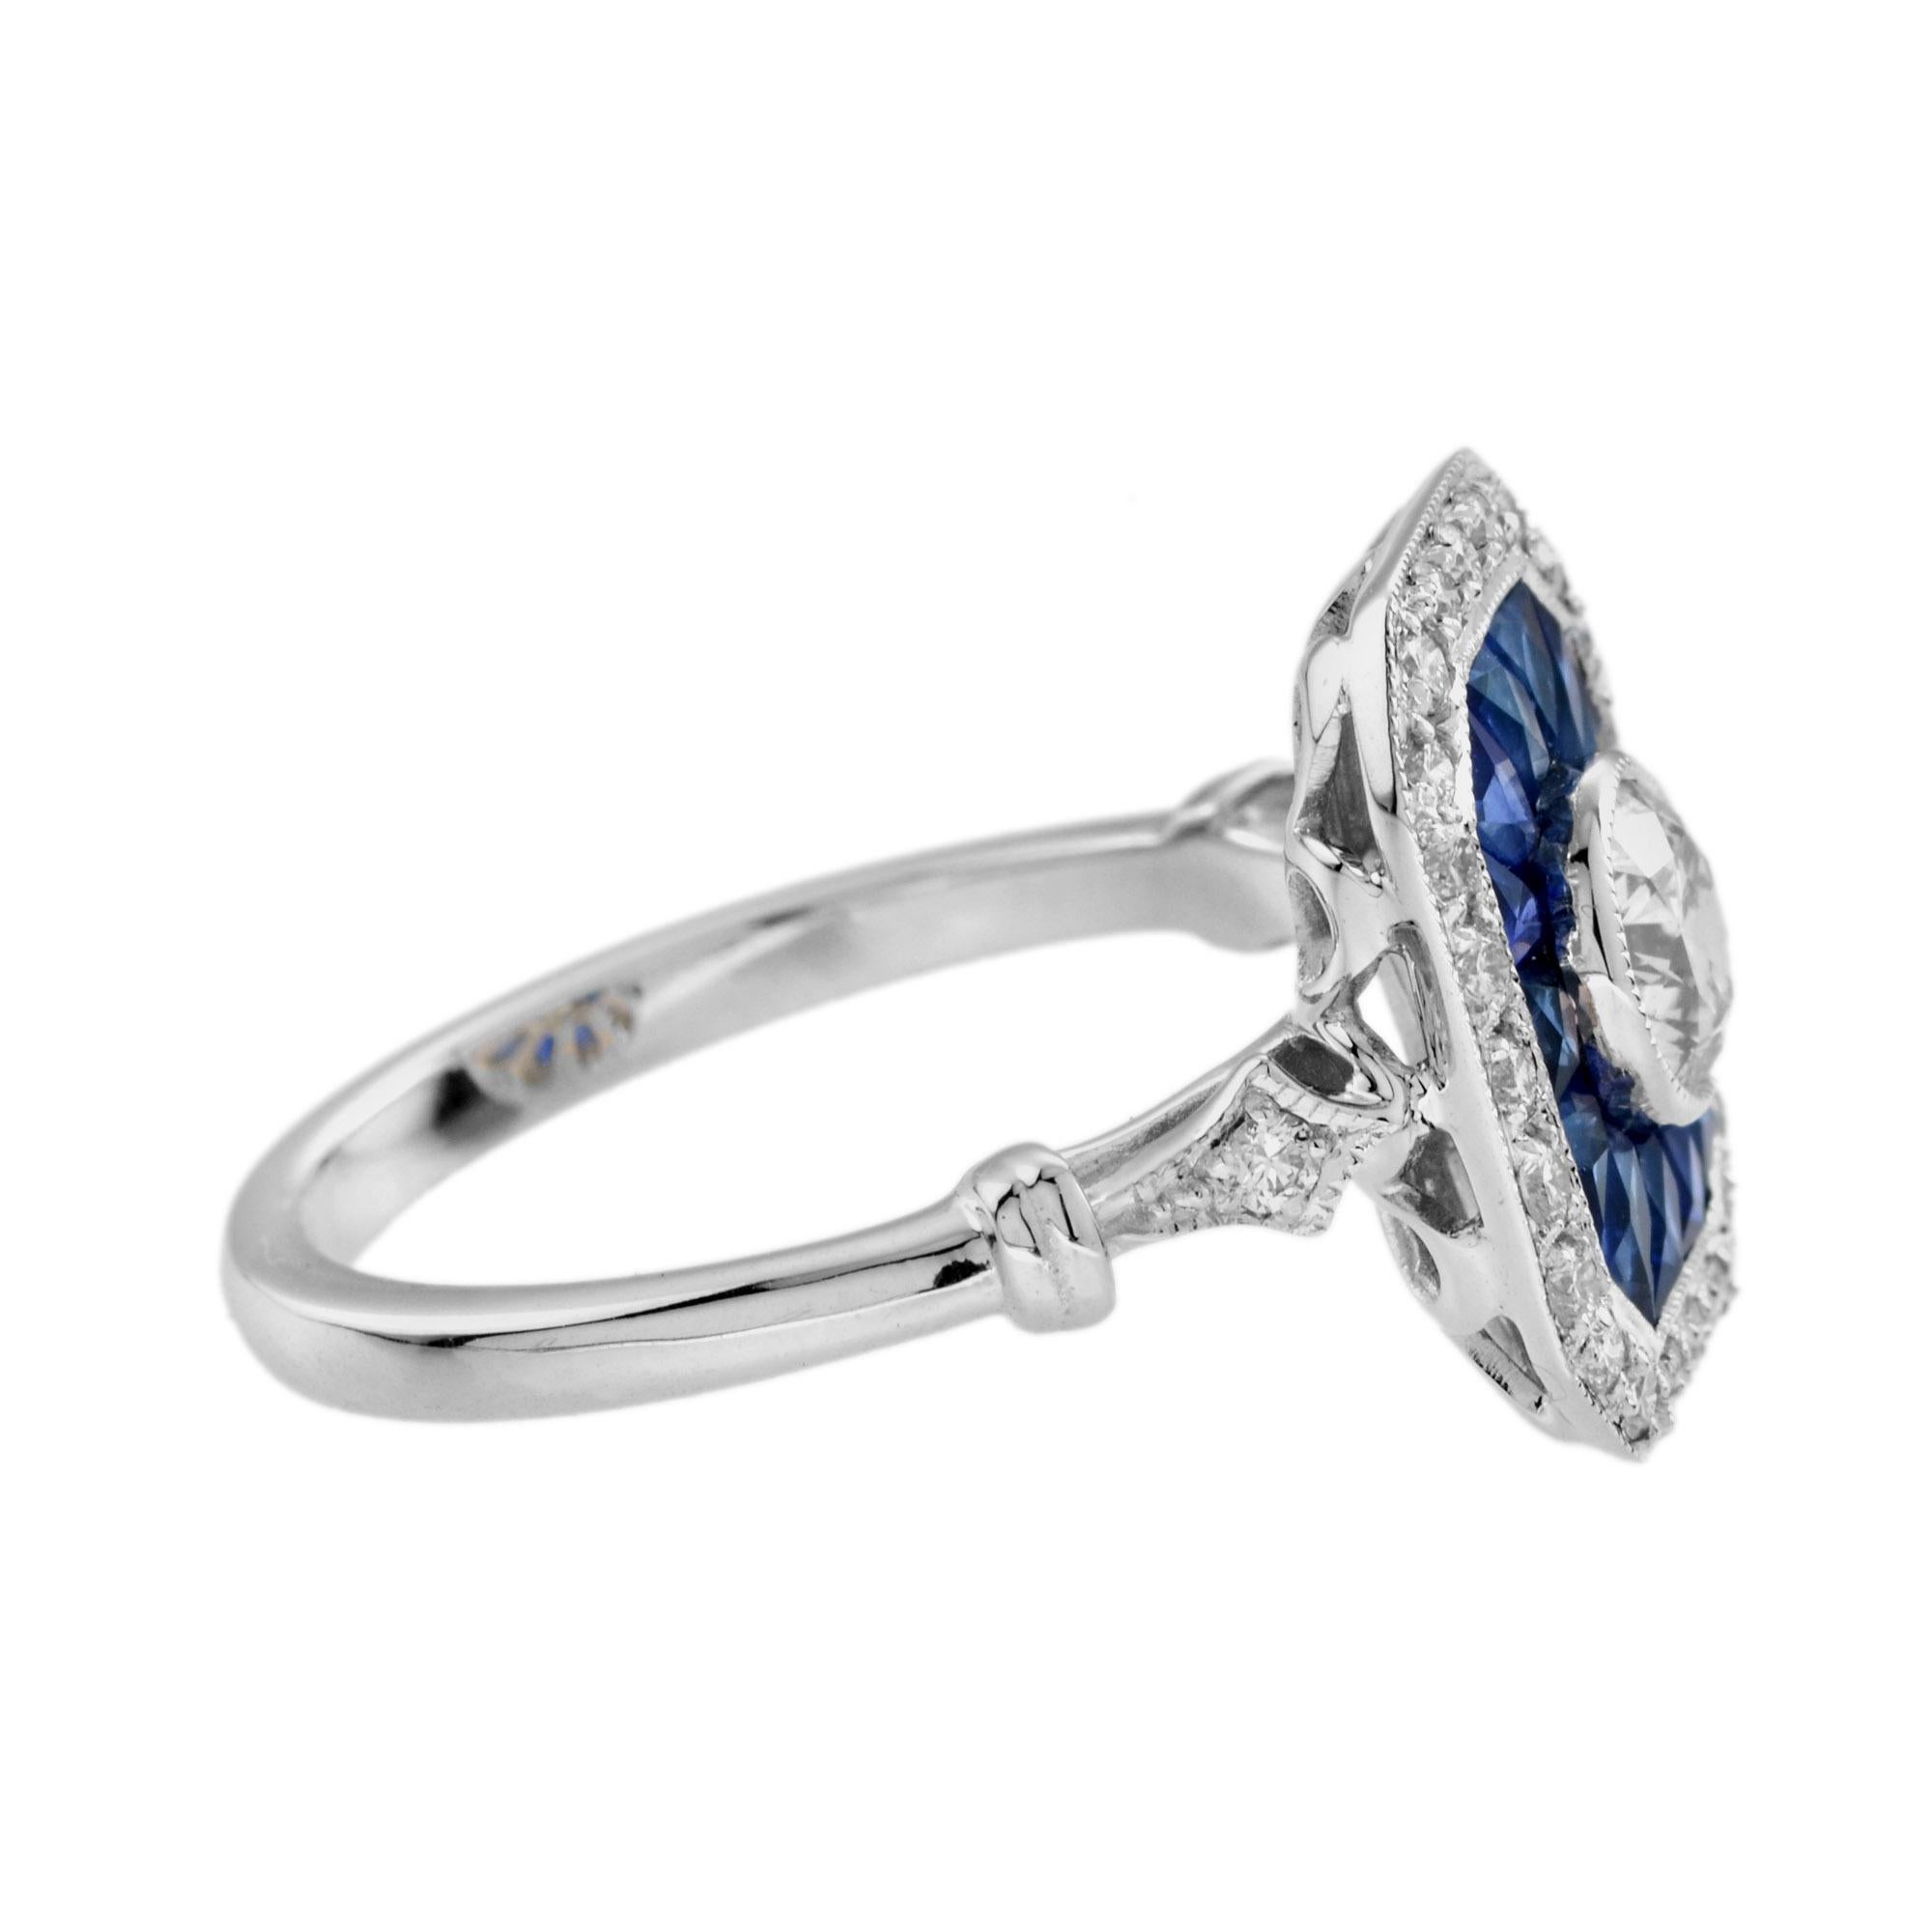 For Sale:  Diamond and Sapphire Art Deco Style Engagement Ring in 18k White Gold 5